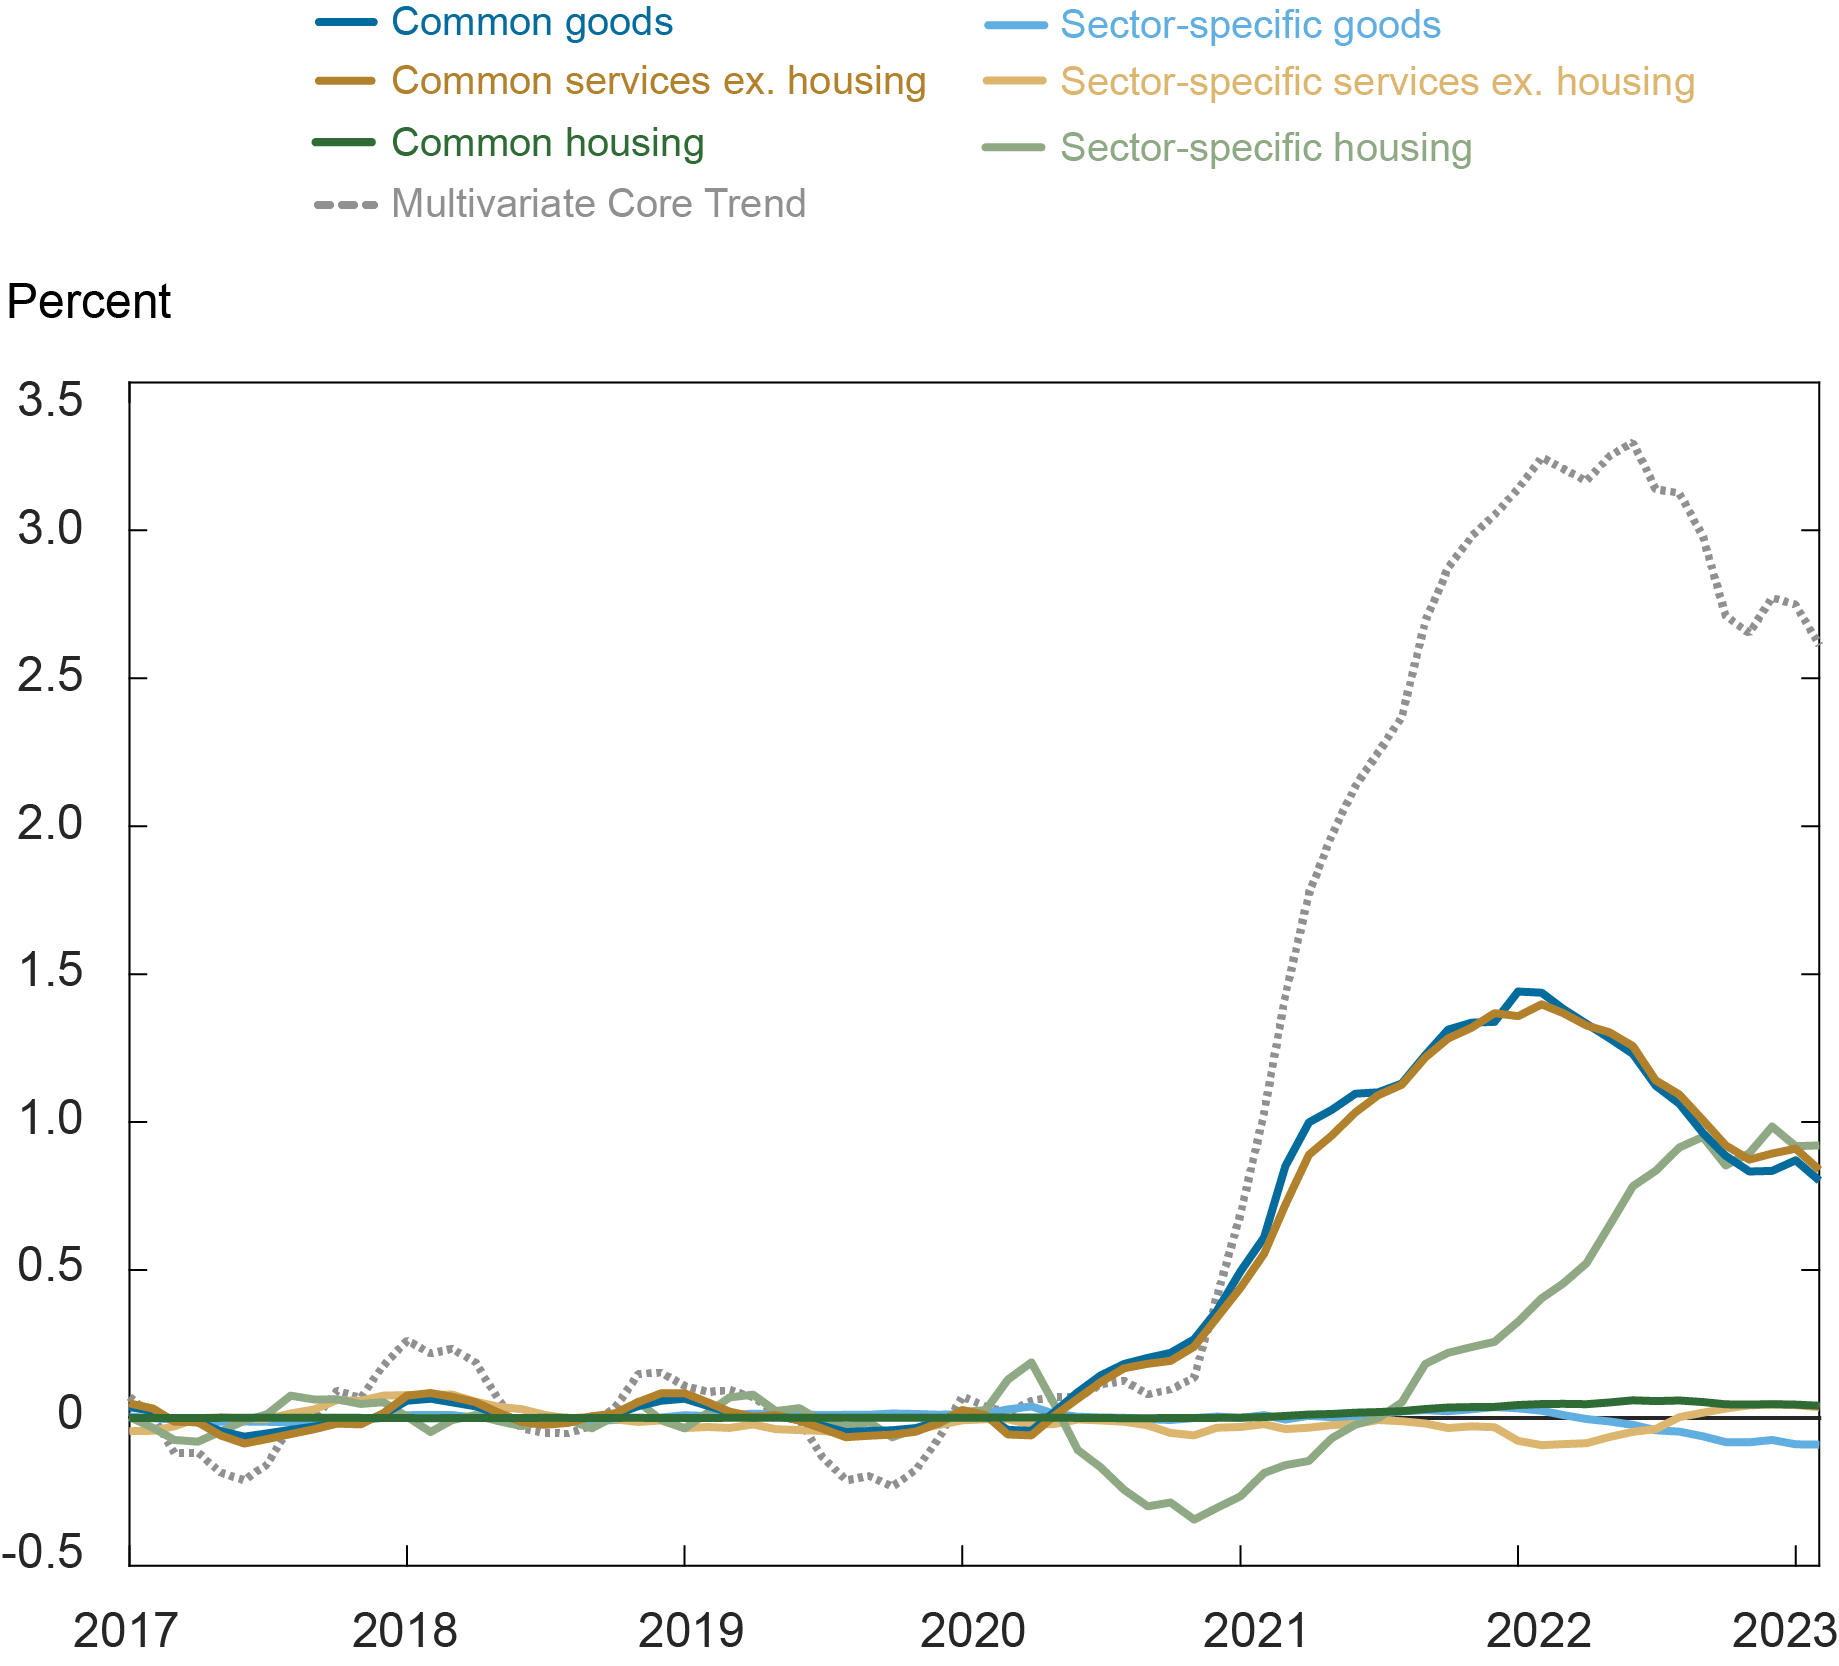 Liberty Street Economics chart shows the source of persistence across different sectors. In the housing sector, the persistence has a strong sector-specific component, while core goods and services ex-housing are dominated by their common component. 